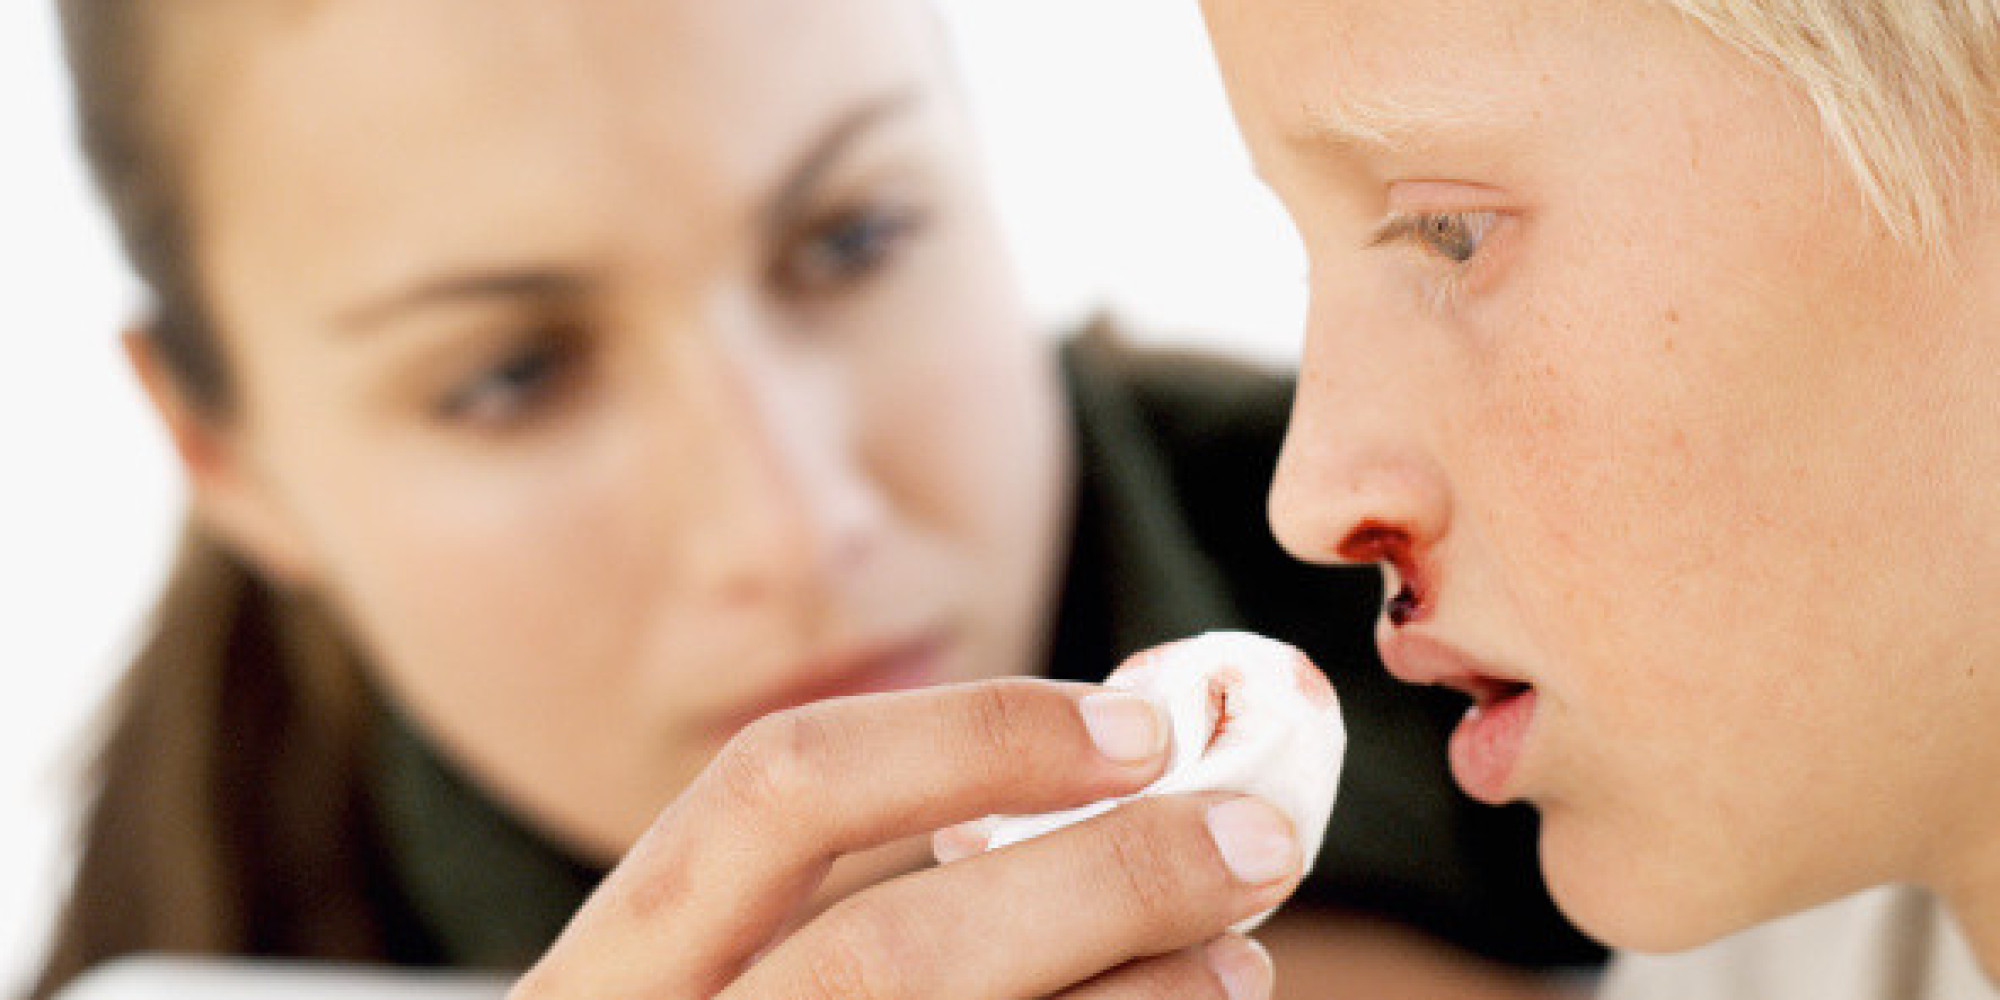 Young woman cleaning the bleeding nose of young boy (8-10) with cotton wool